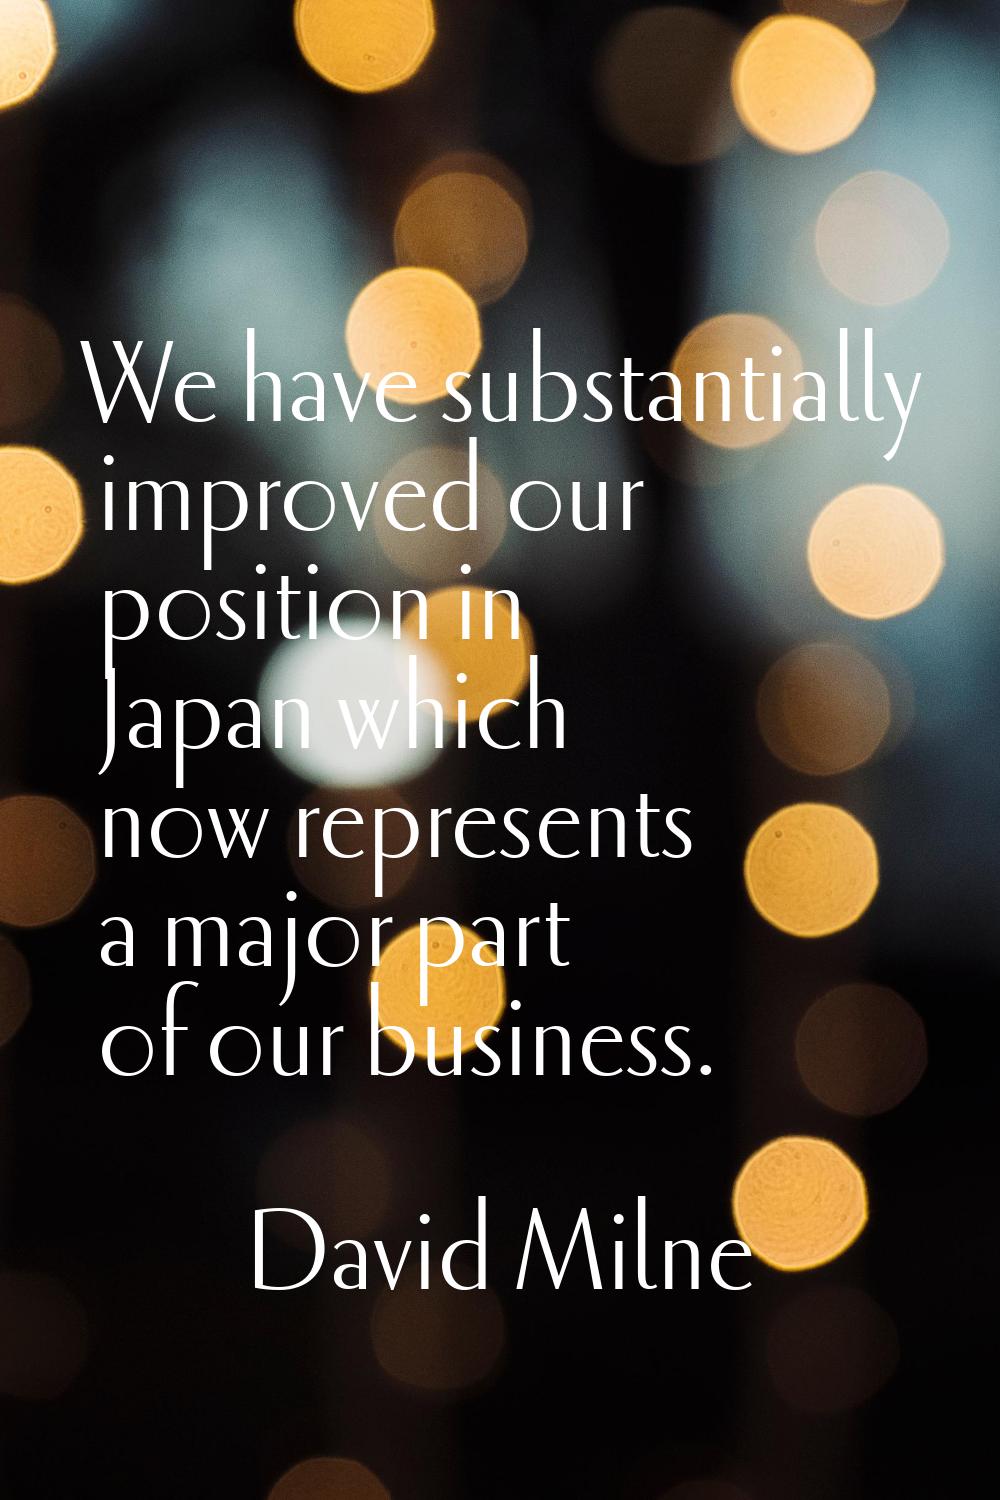 We have substantially improved our position in Japan which now represents a major part of our busin